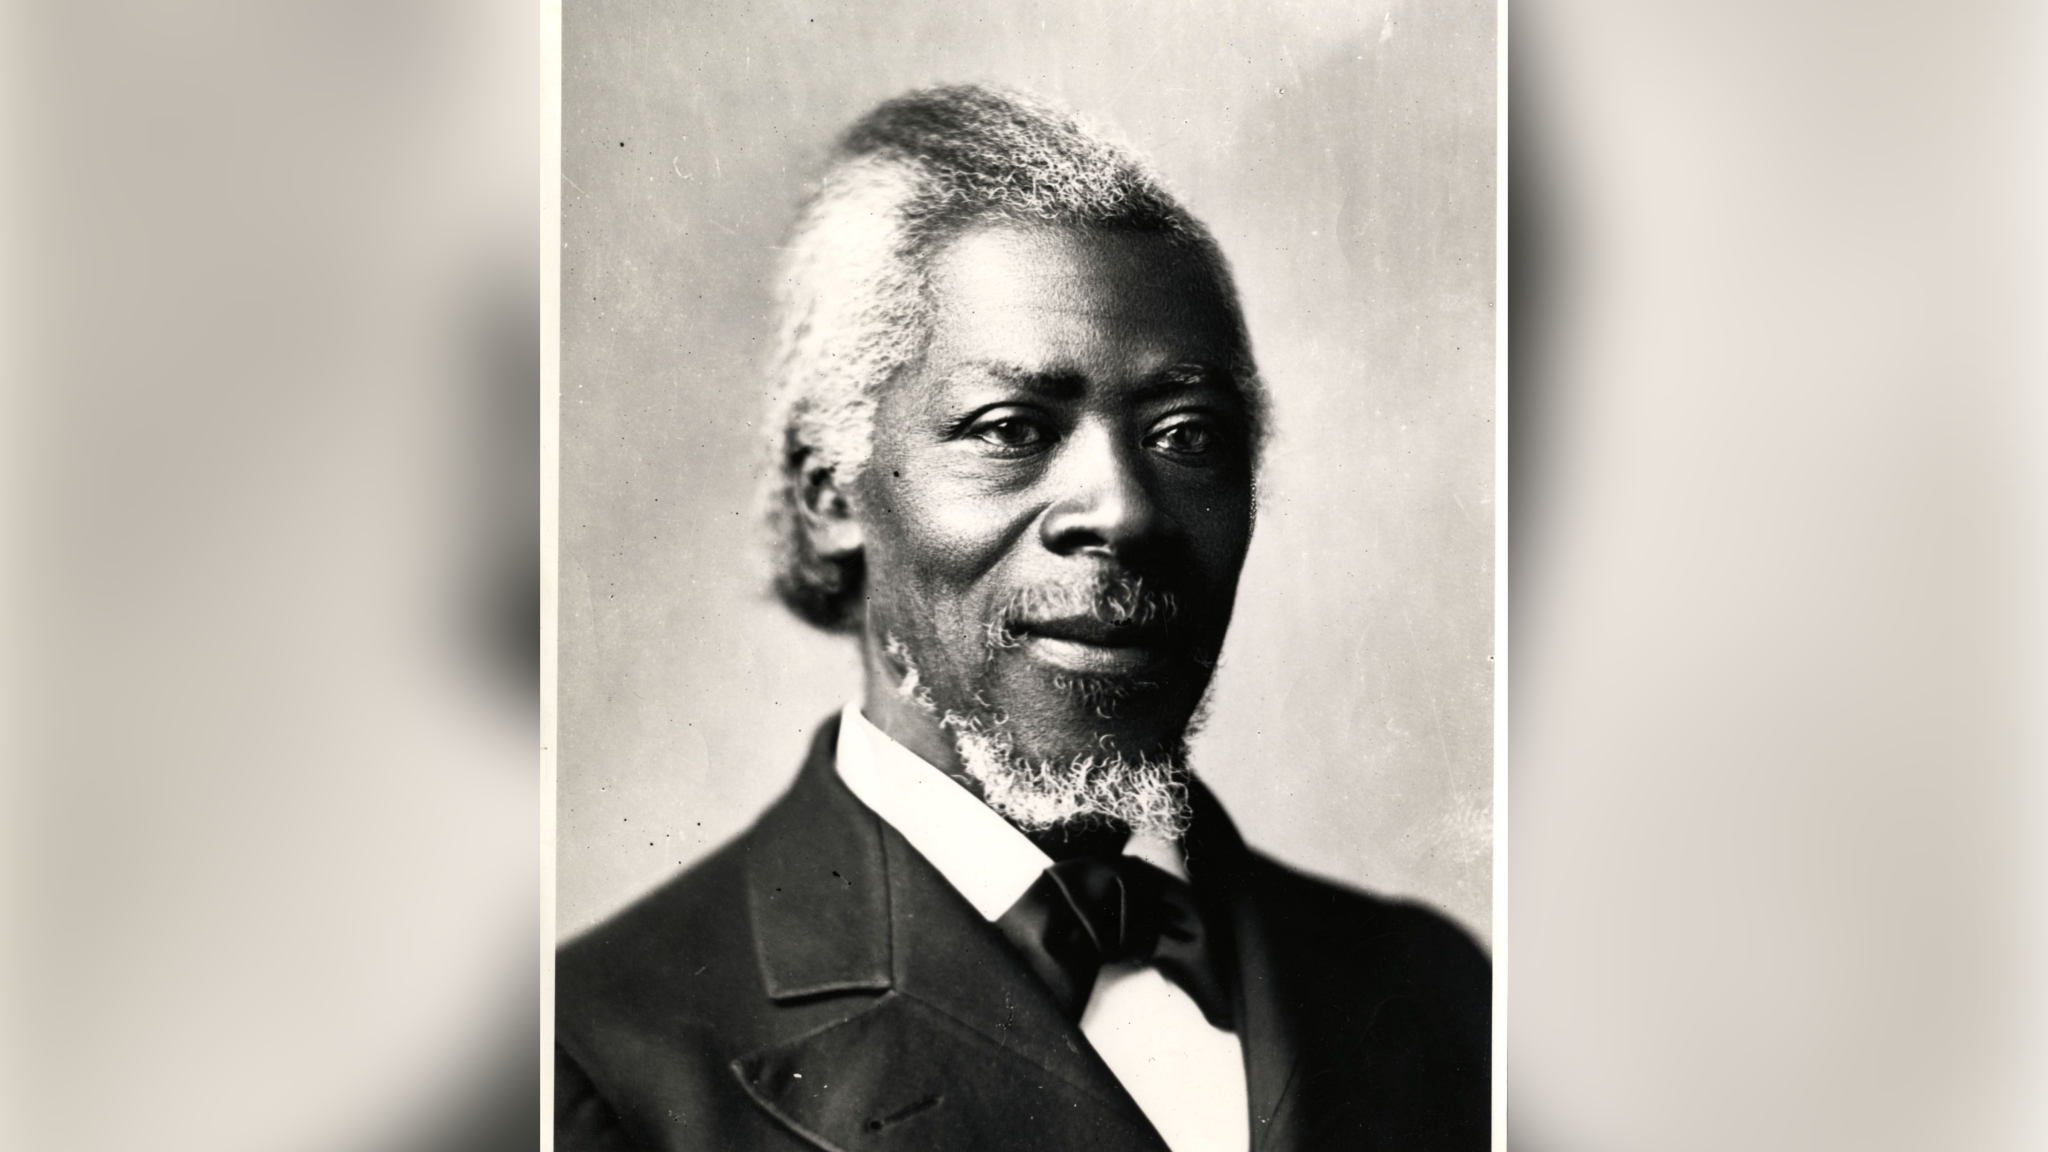 William Lambert was a significant figure in Detroit's abolitionist movement during the mid to late 19th century.